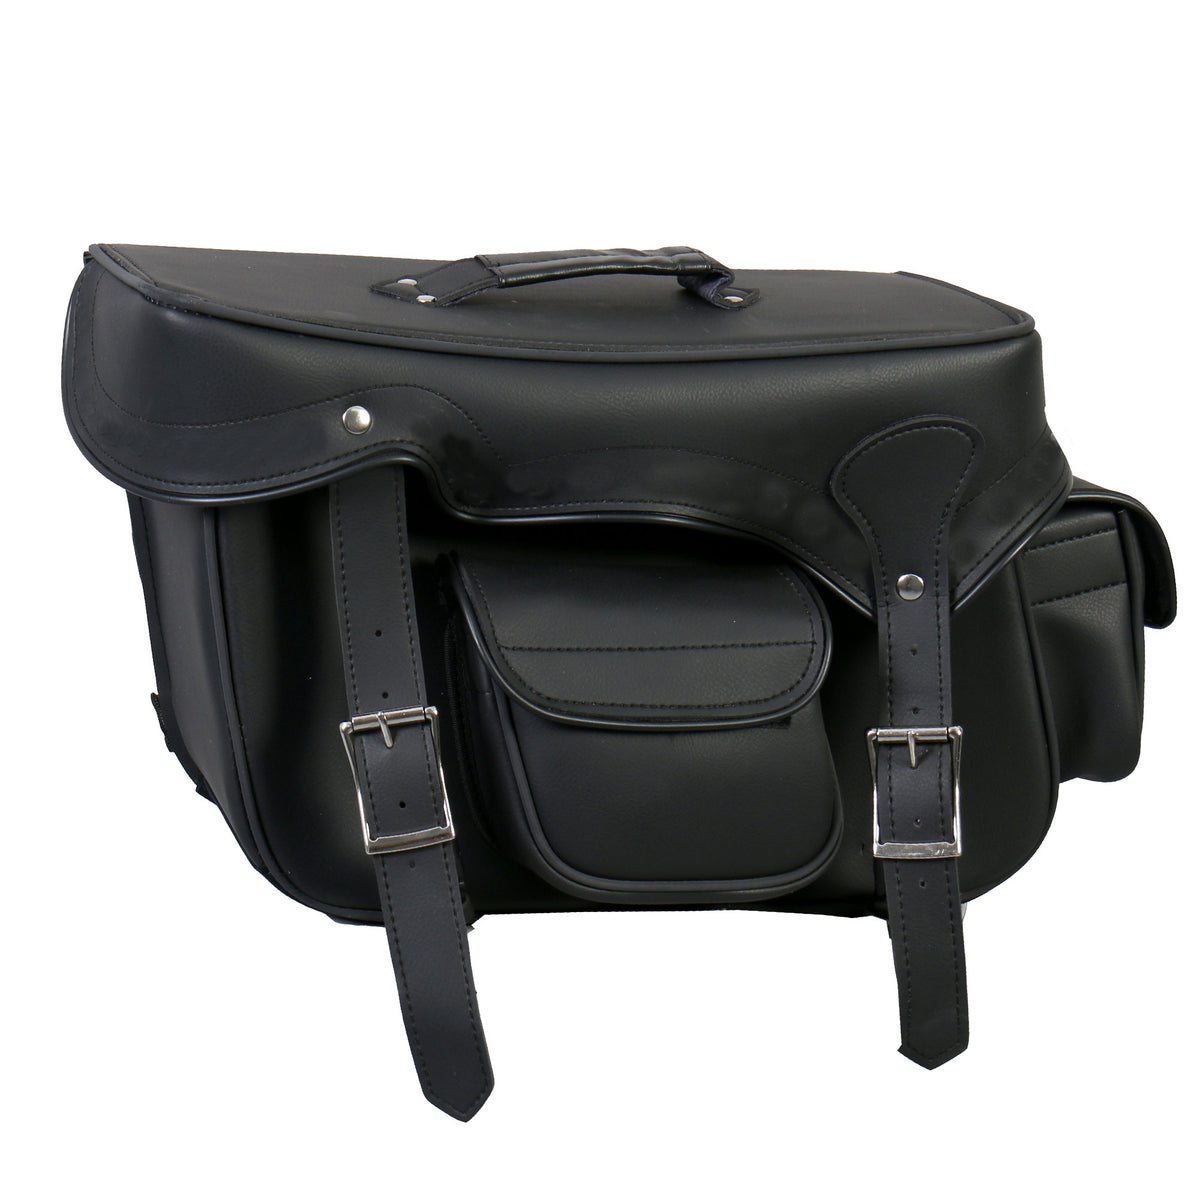 Hot Leathers Extra Large Saddle Bag with Concealed Carry Pocket and Reflective Piping 20X11X7 SDA1005